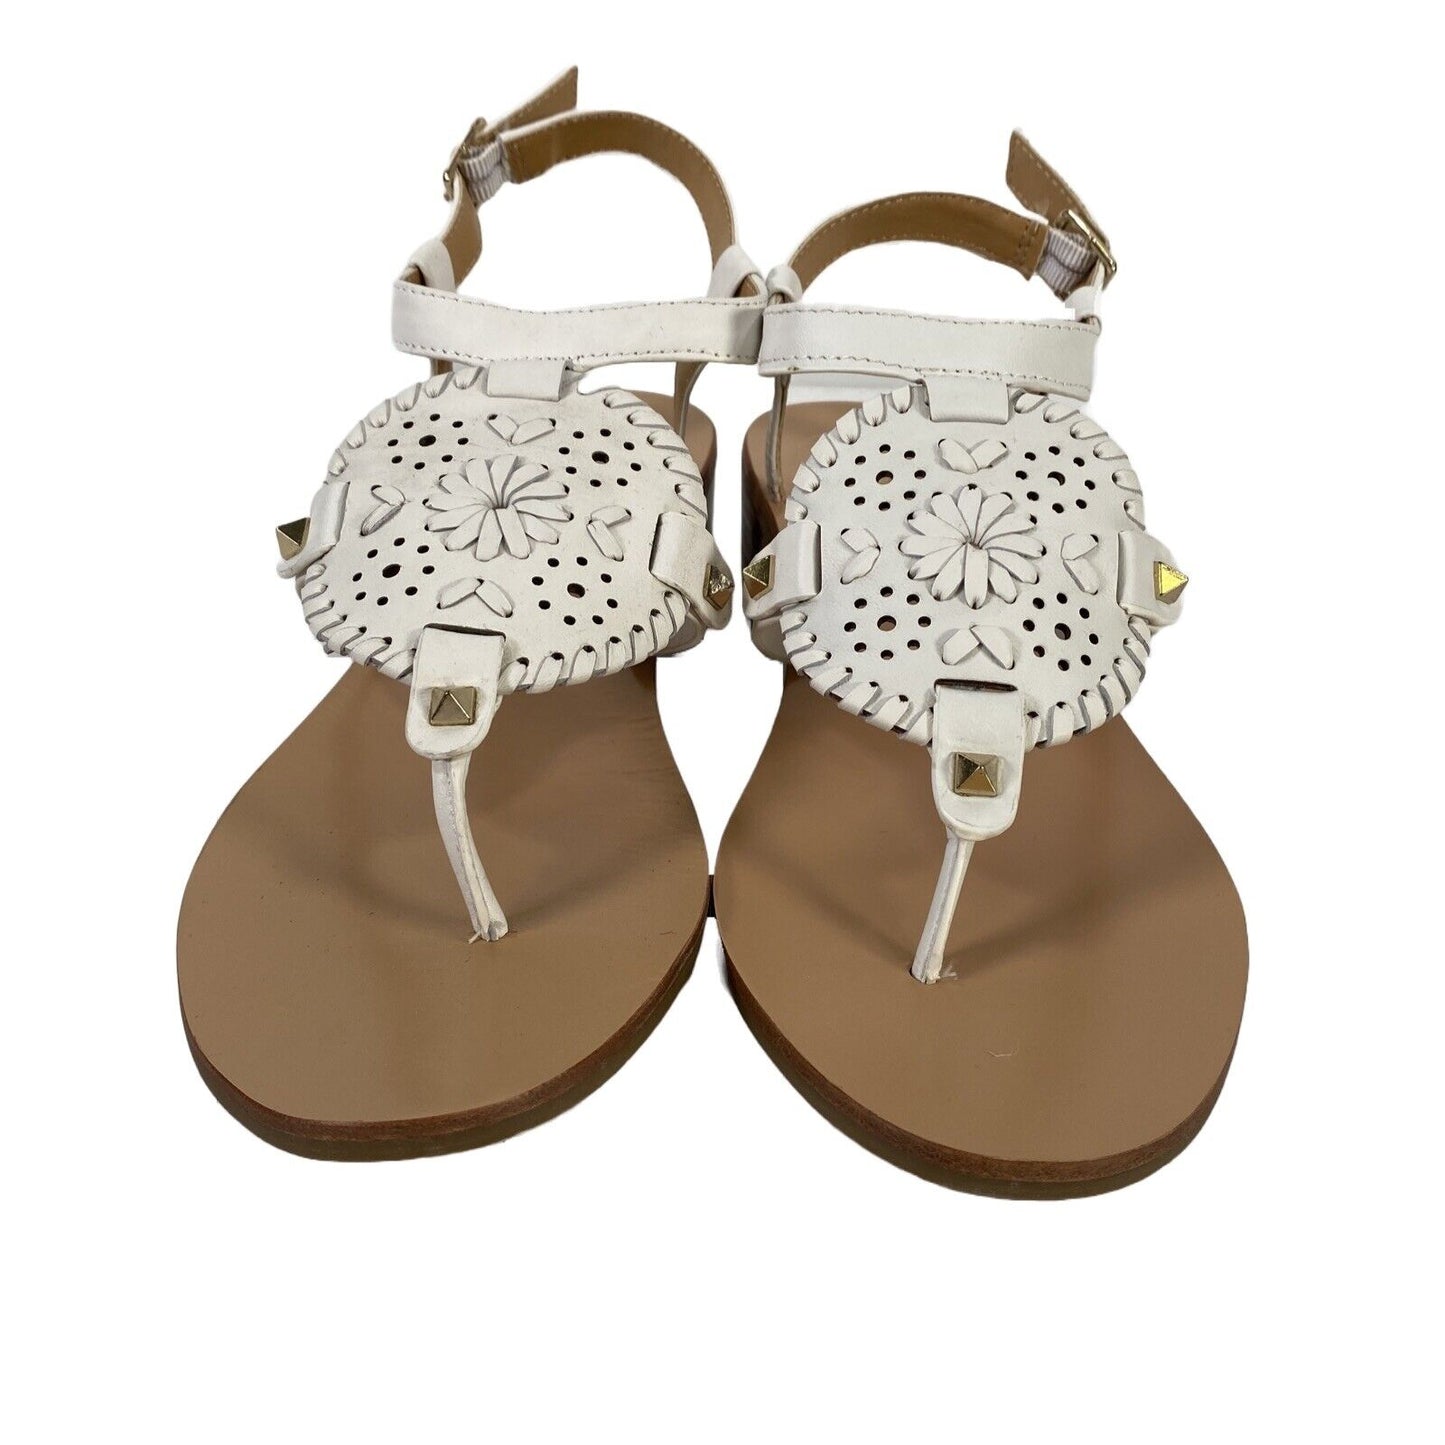 NEW Jack Rogers Women's White Leather Gretchen Heeled Sandals - 9M